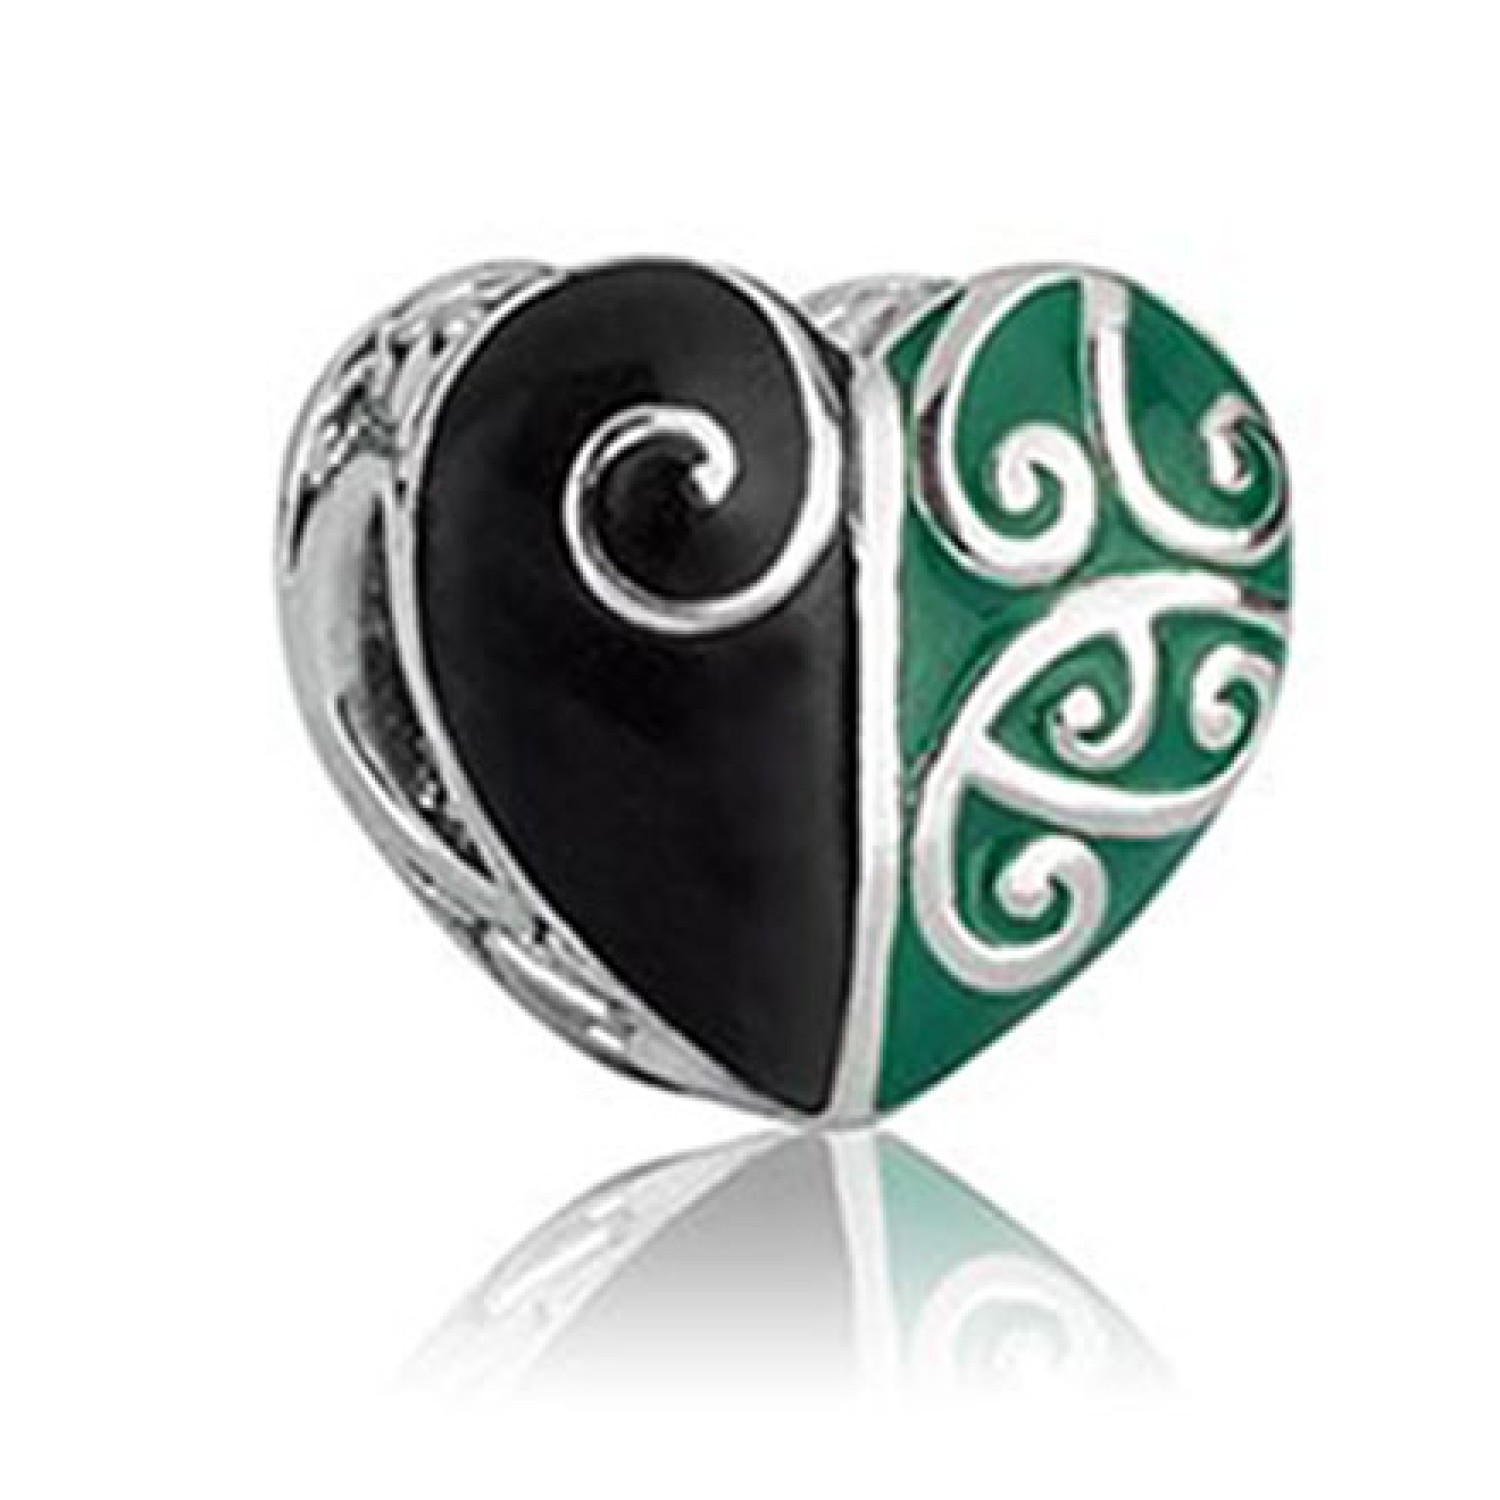 LKE042 Evolve Heart of the Forest. This green and black heart was especially created for those who truly have a love for Aotearoa. The deep black embodies the proud and loyal kiwi spirit whilst the green captures New Zealand’s natural beauty. Etched into 